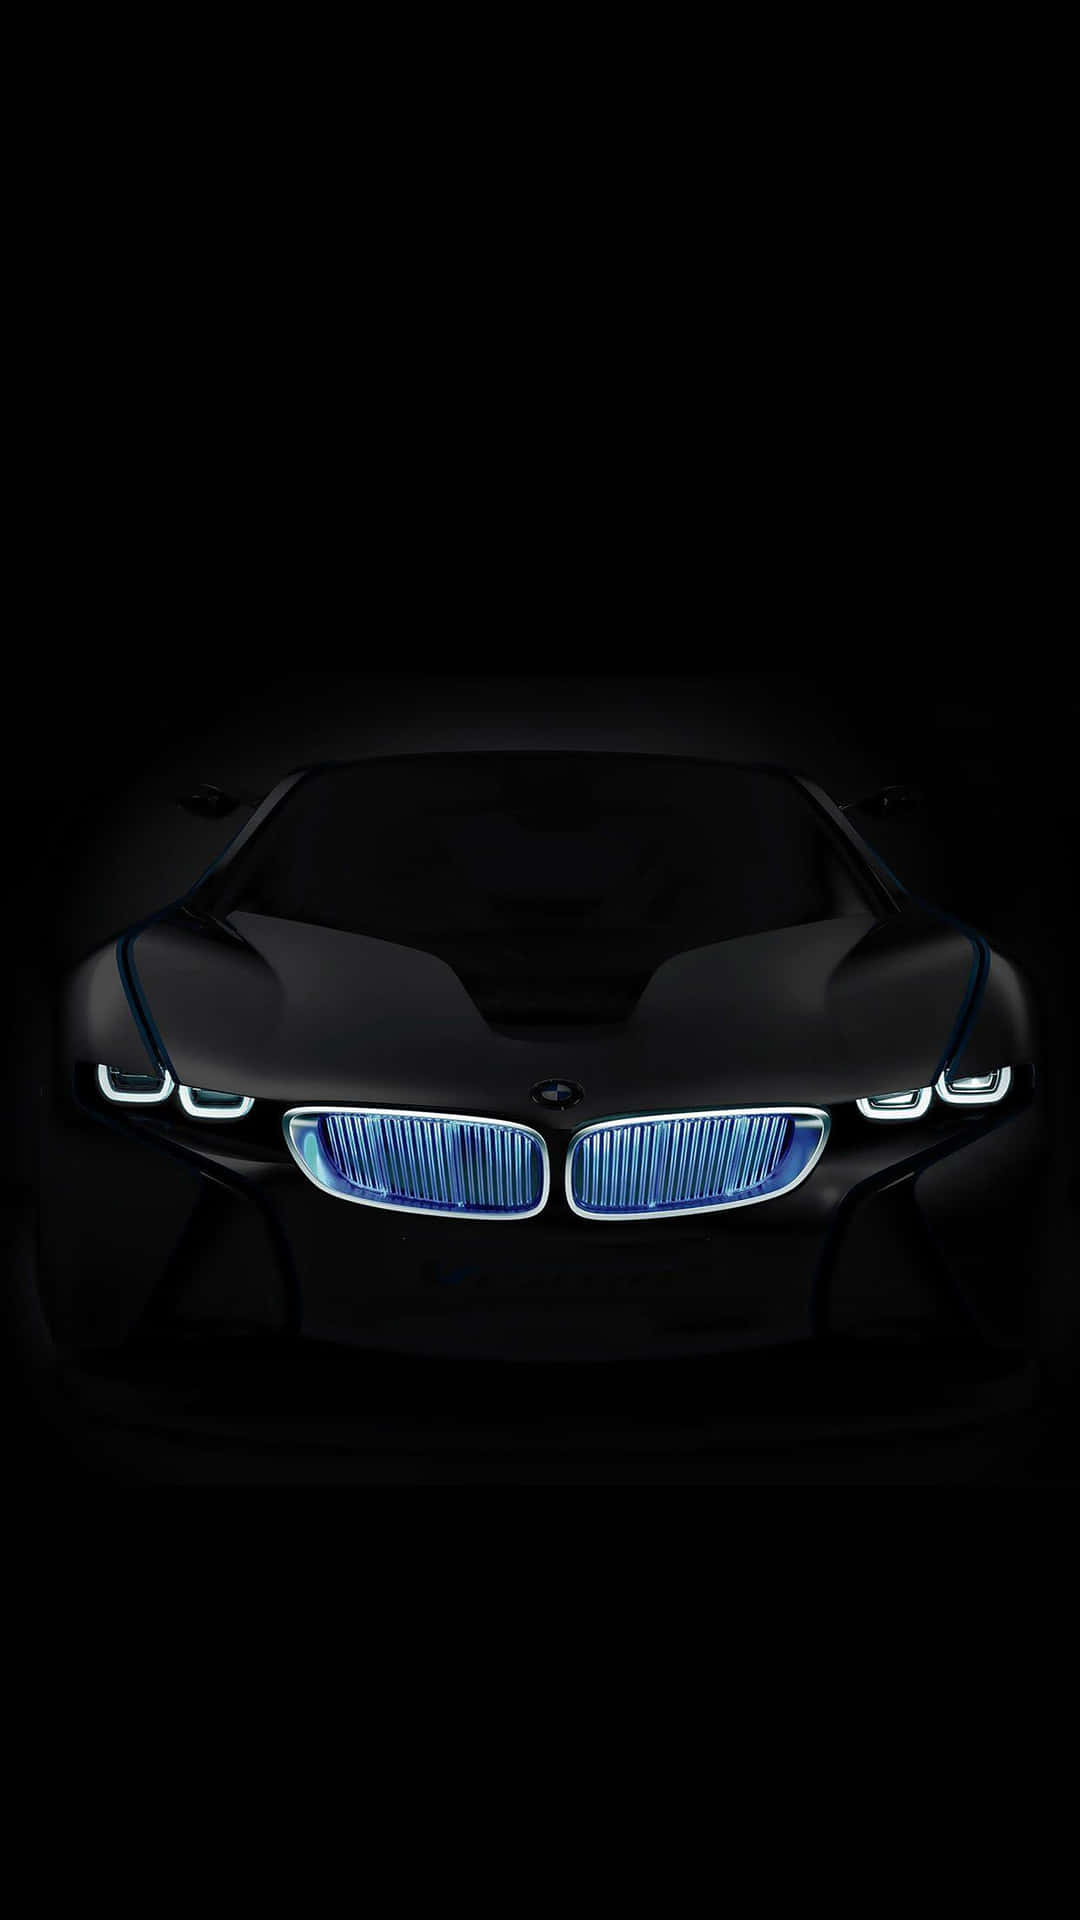 The Bmw Android Background